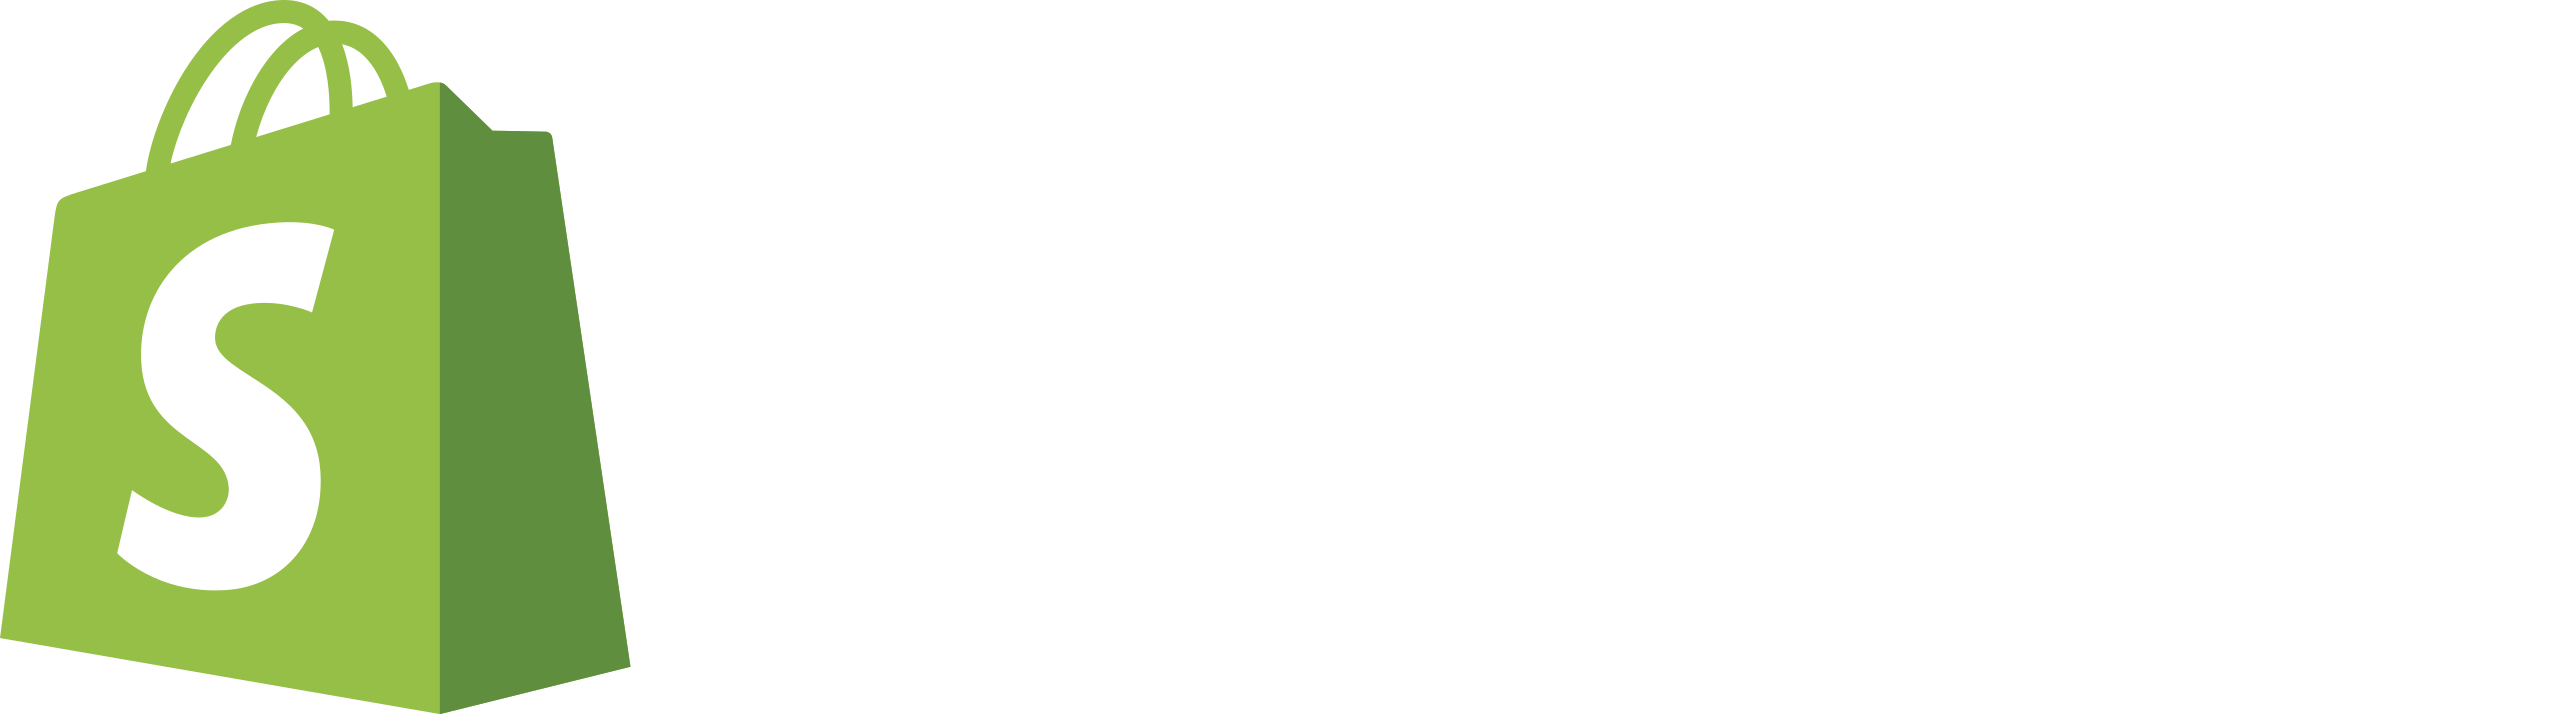 Faster checkout with Shopify!